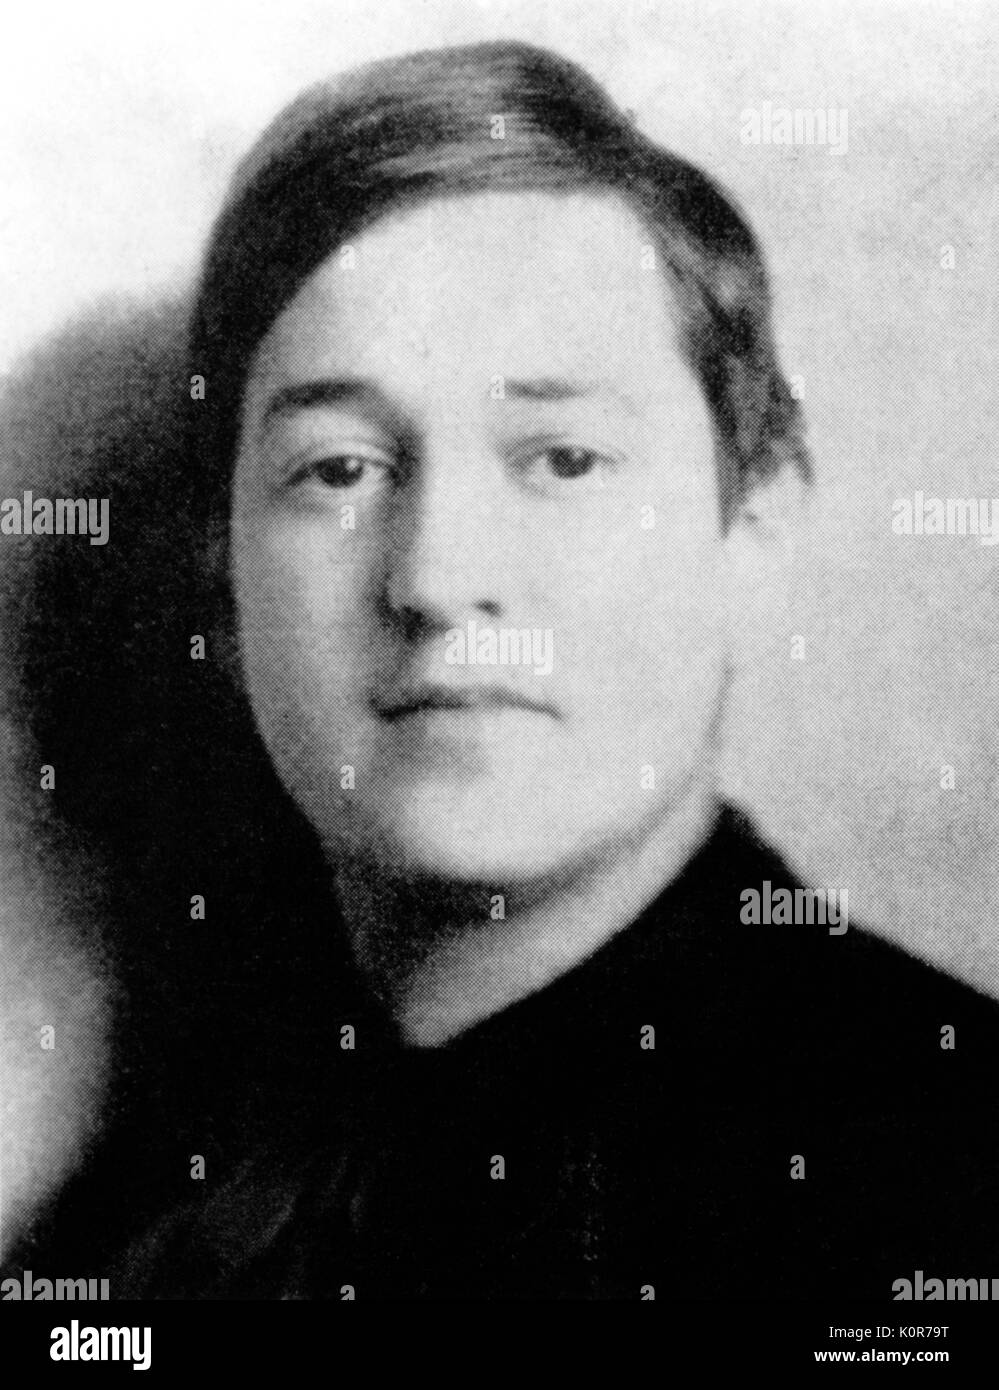 Erich Wolfgang Korngold - portrait of the Austrian composer. 29 May 1897 - 29 November 1957. Stock Photo